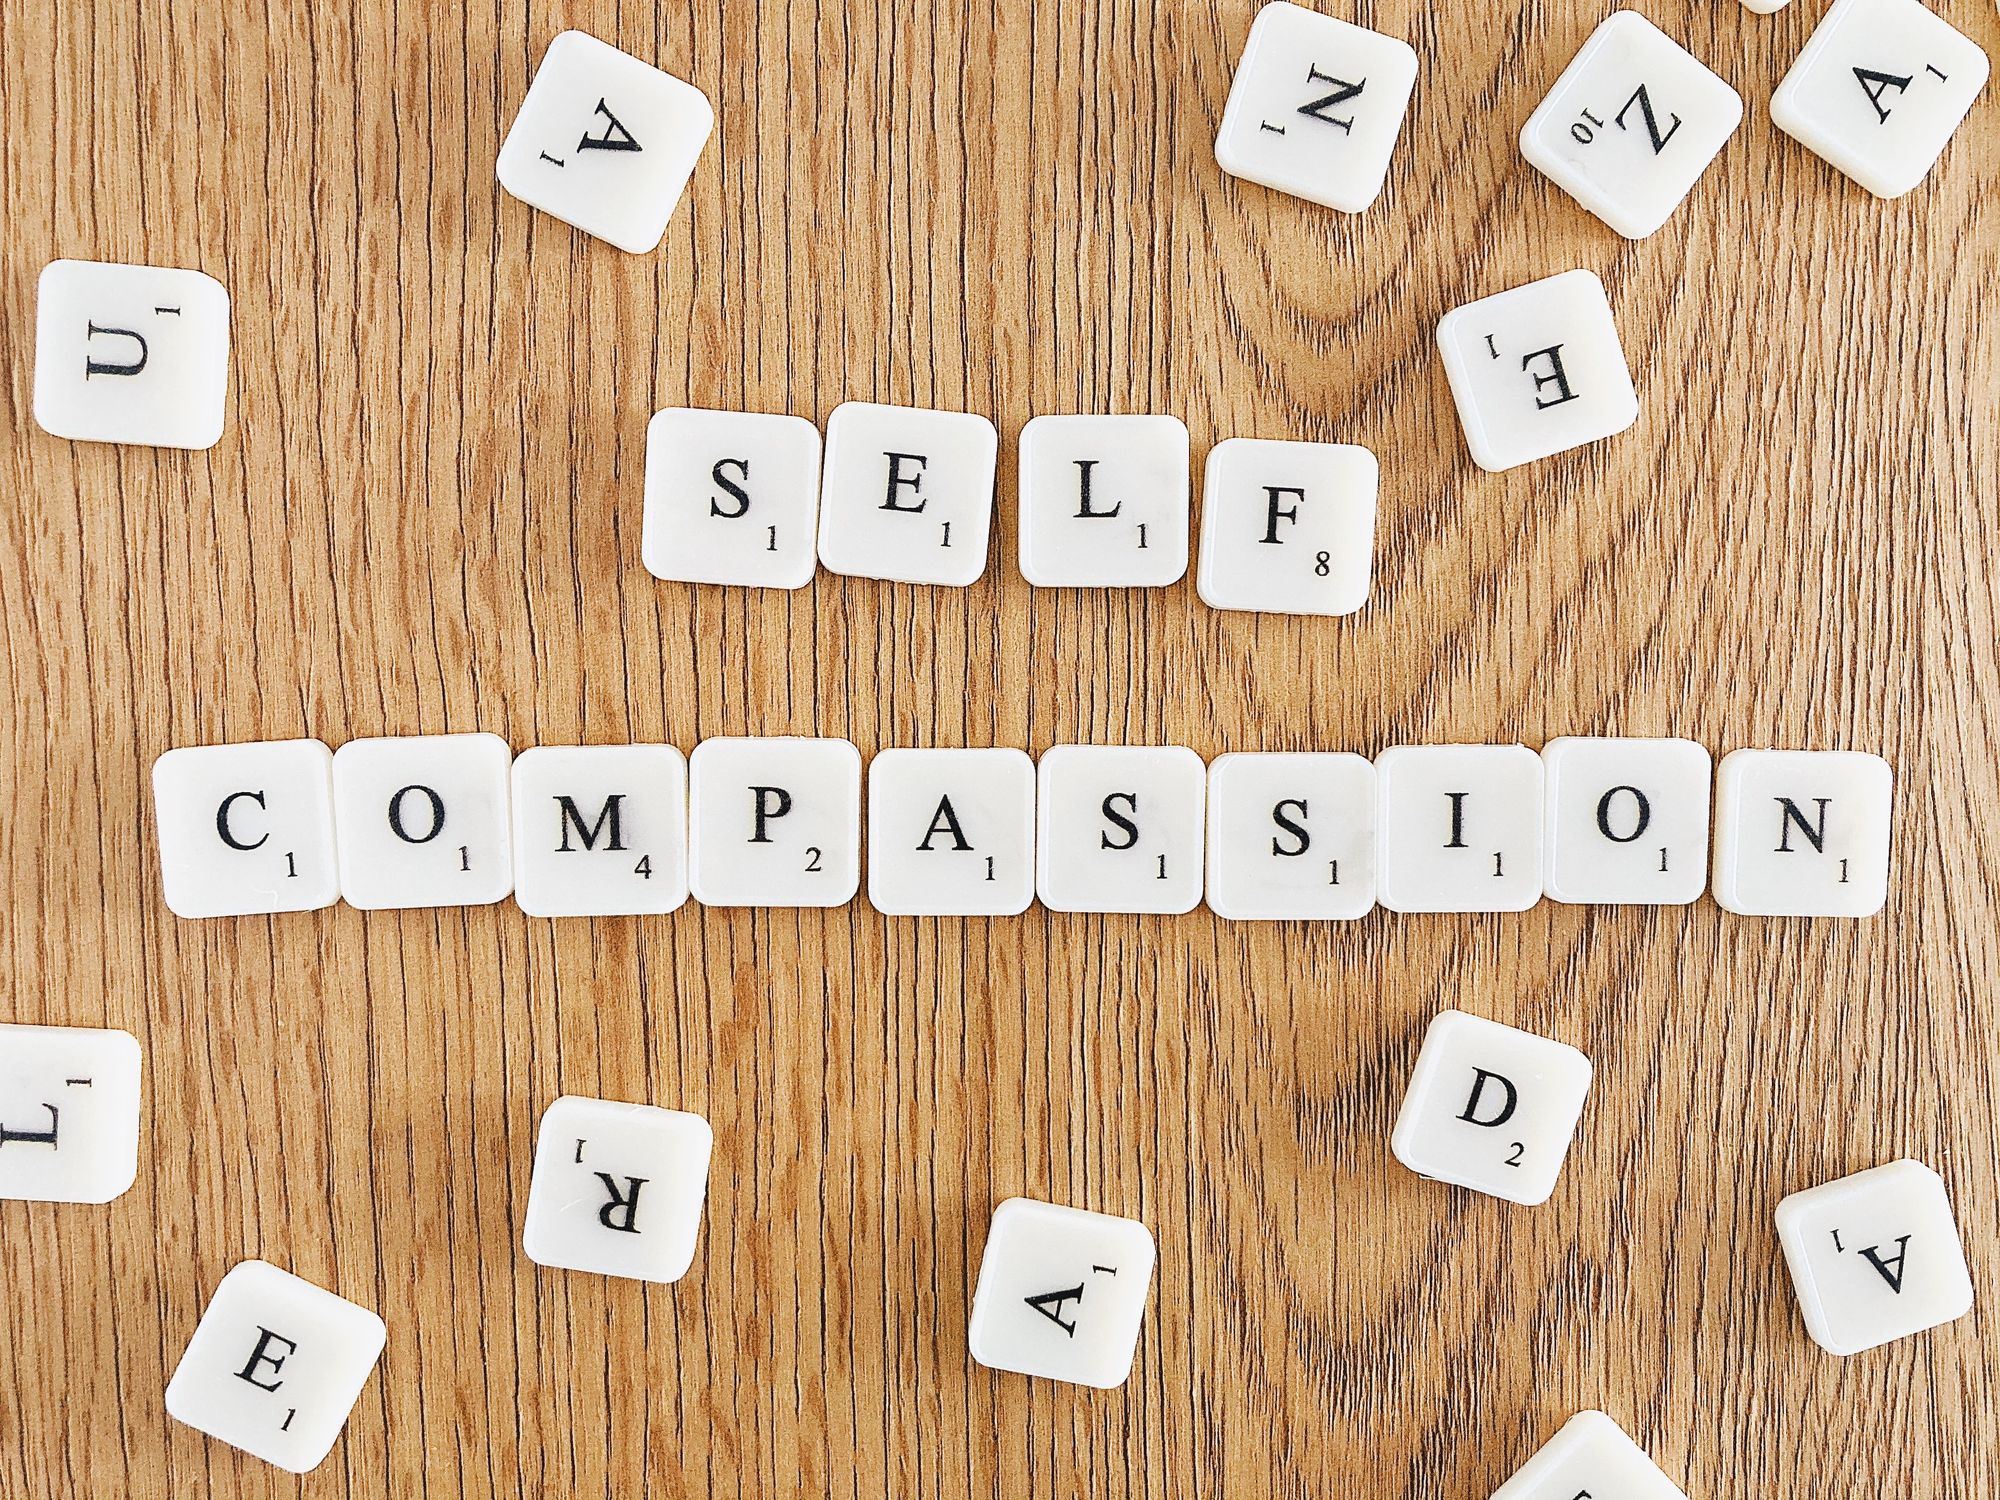 Practice self-compassion  for good mental health